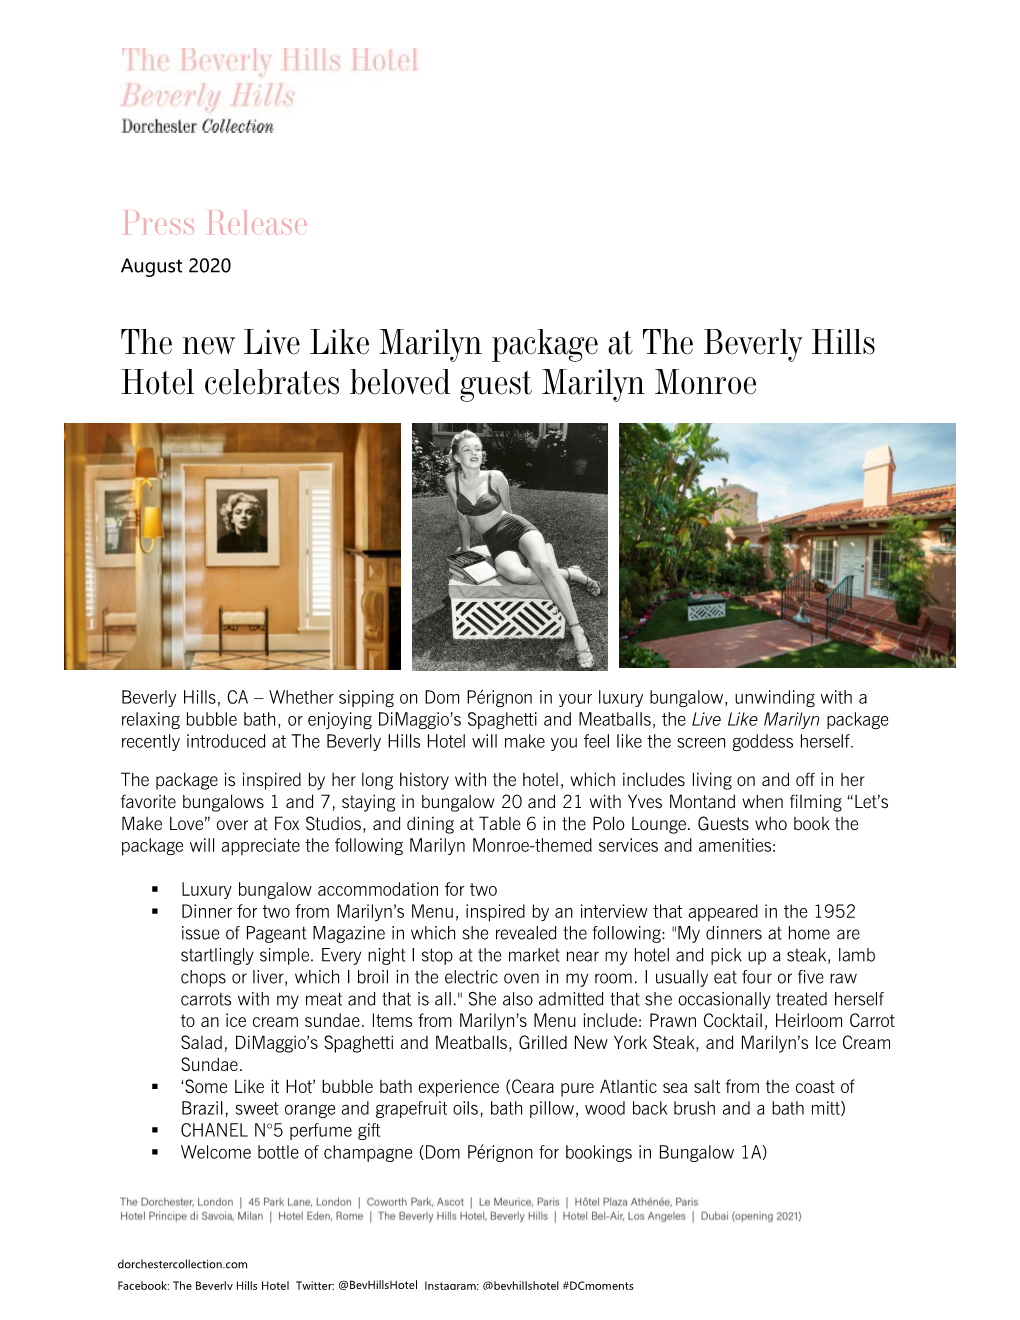 The New Live Like Marilyn Package at the Beverly Hills Hotel Celebrates Beloved Guest Marilyn Monroe